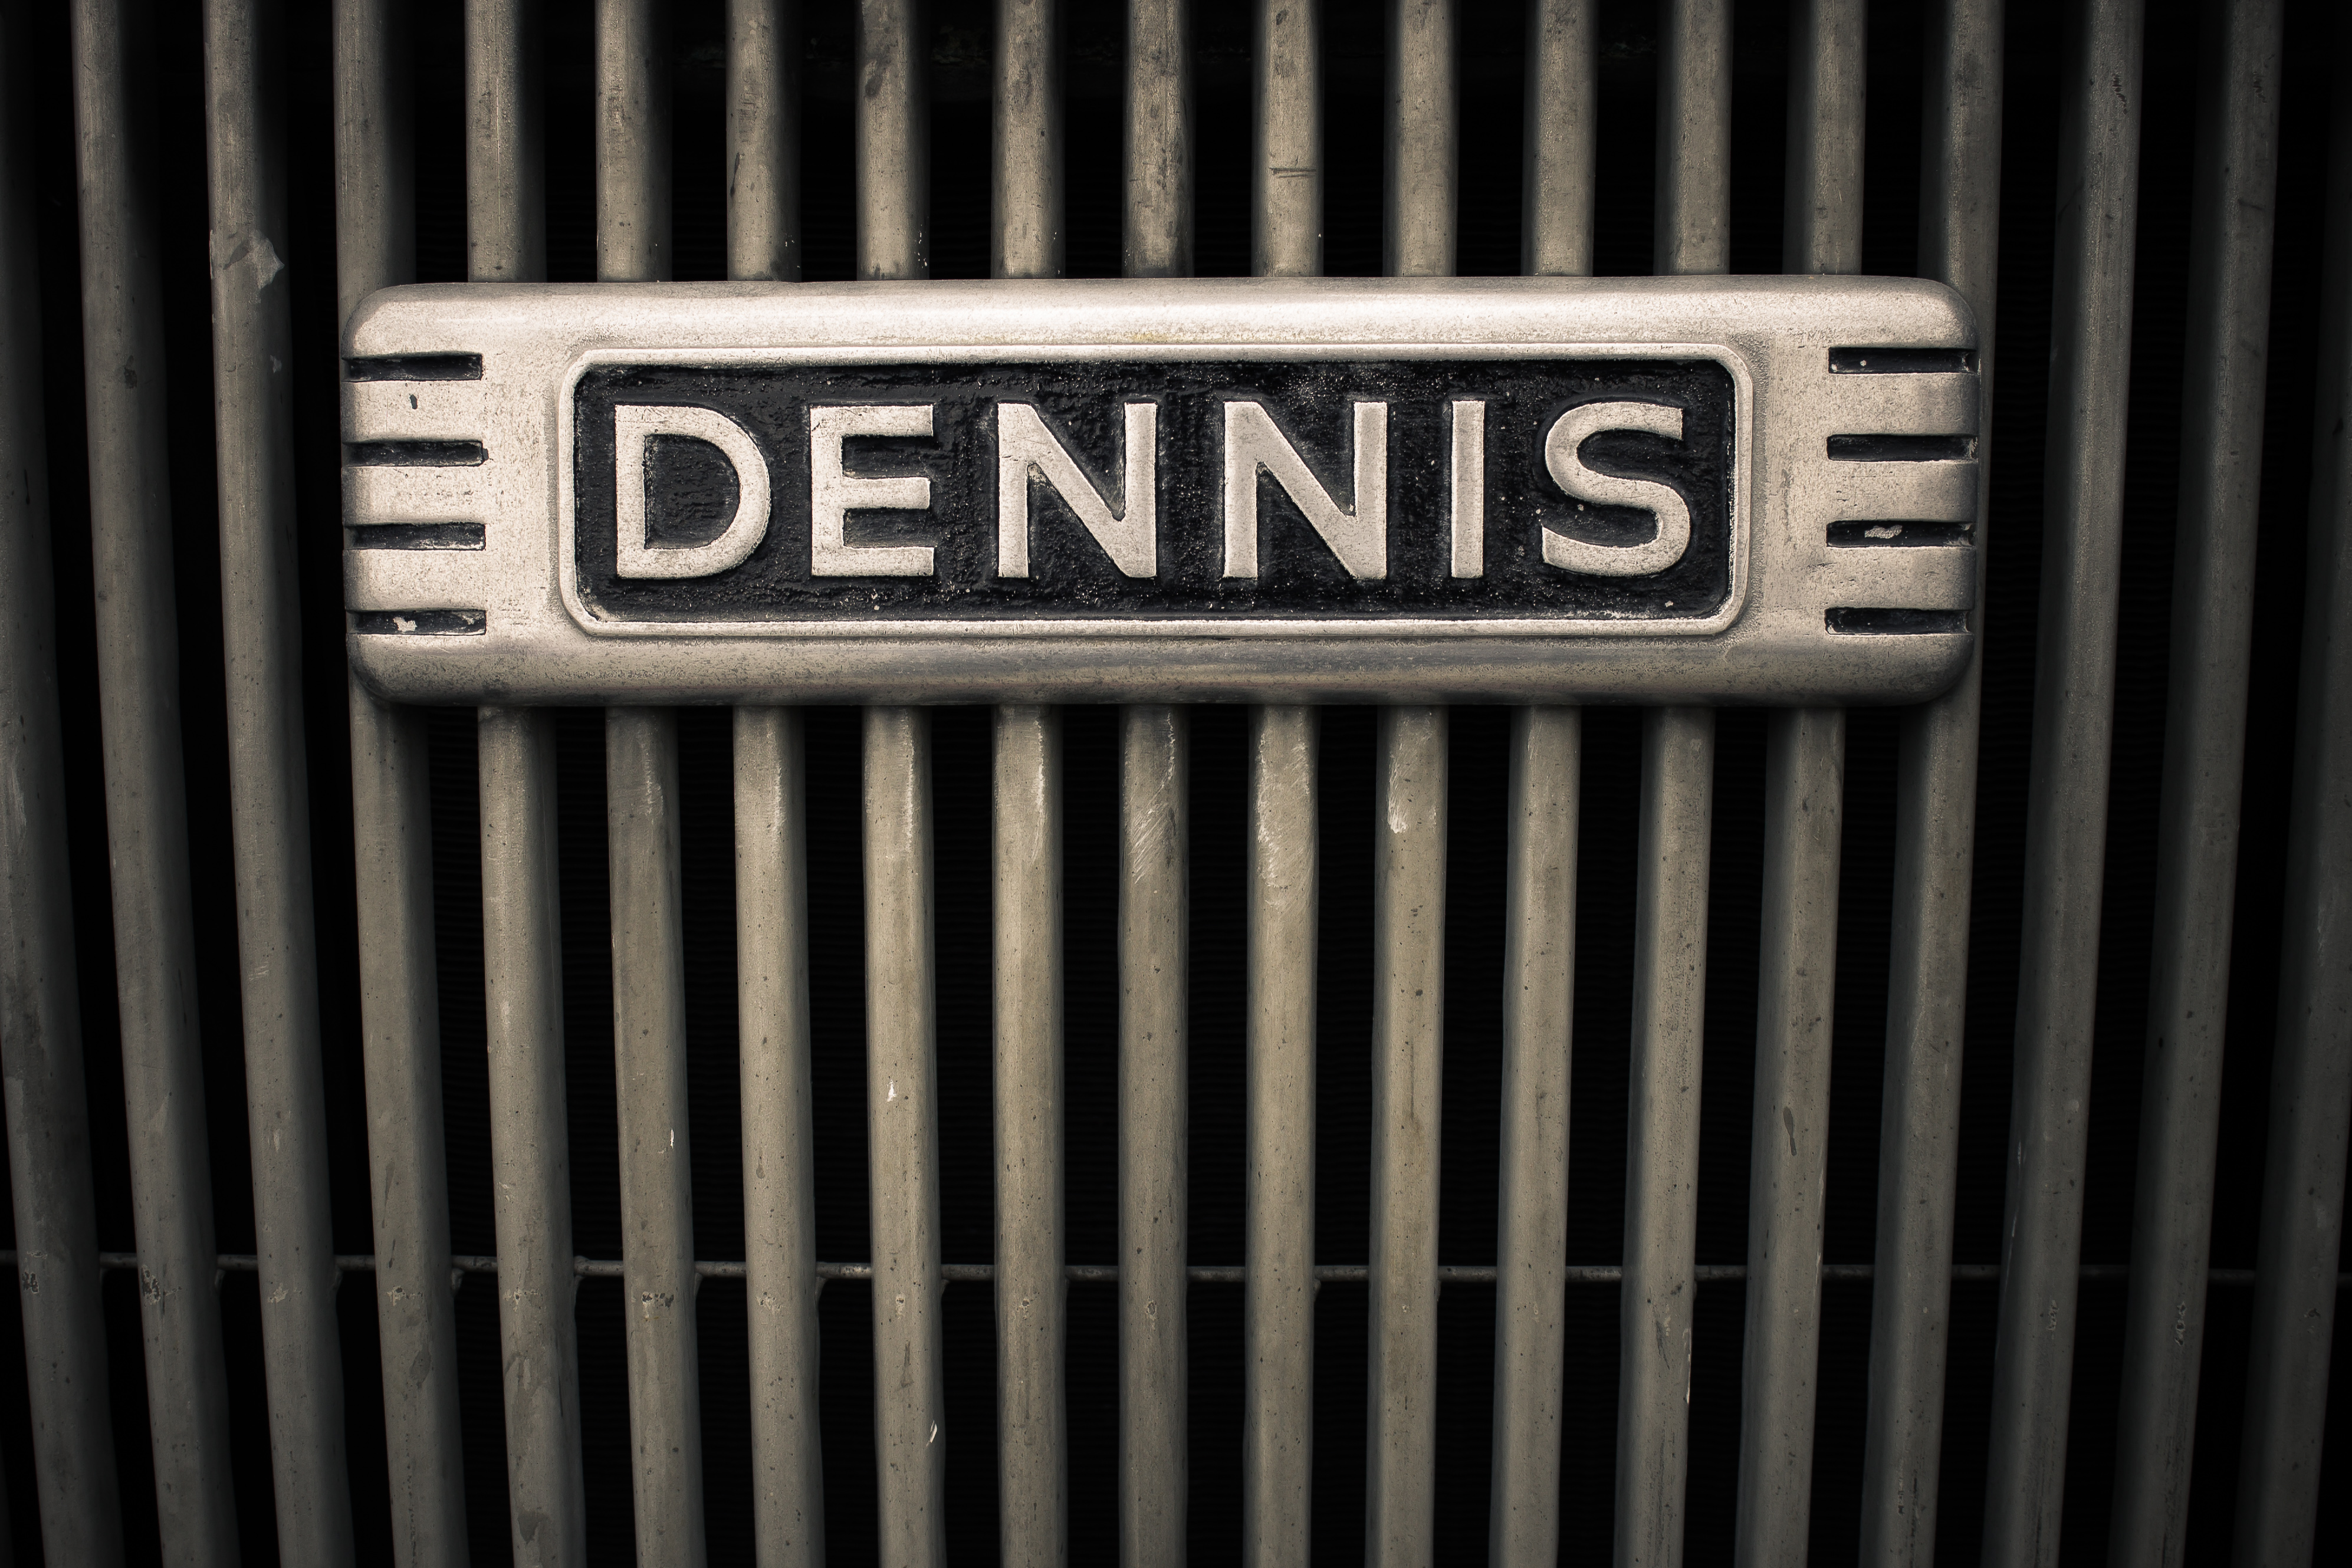 old firetruck grill with dennis